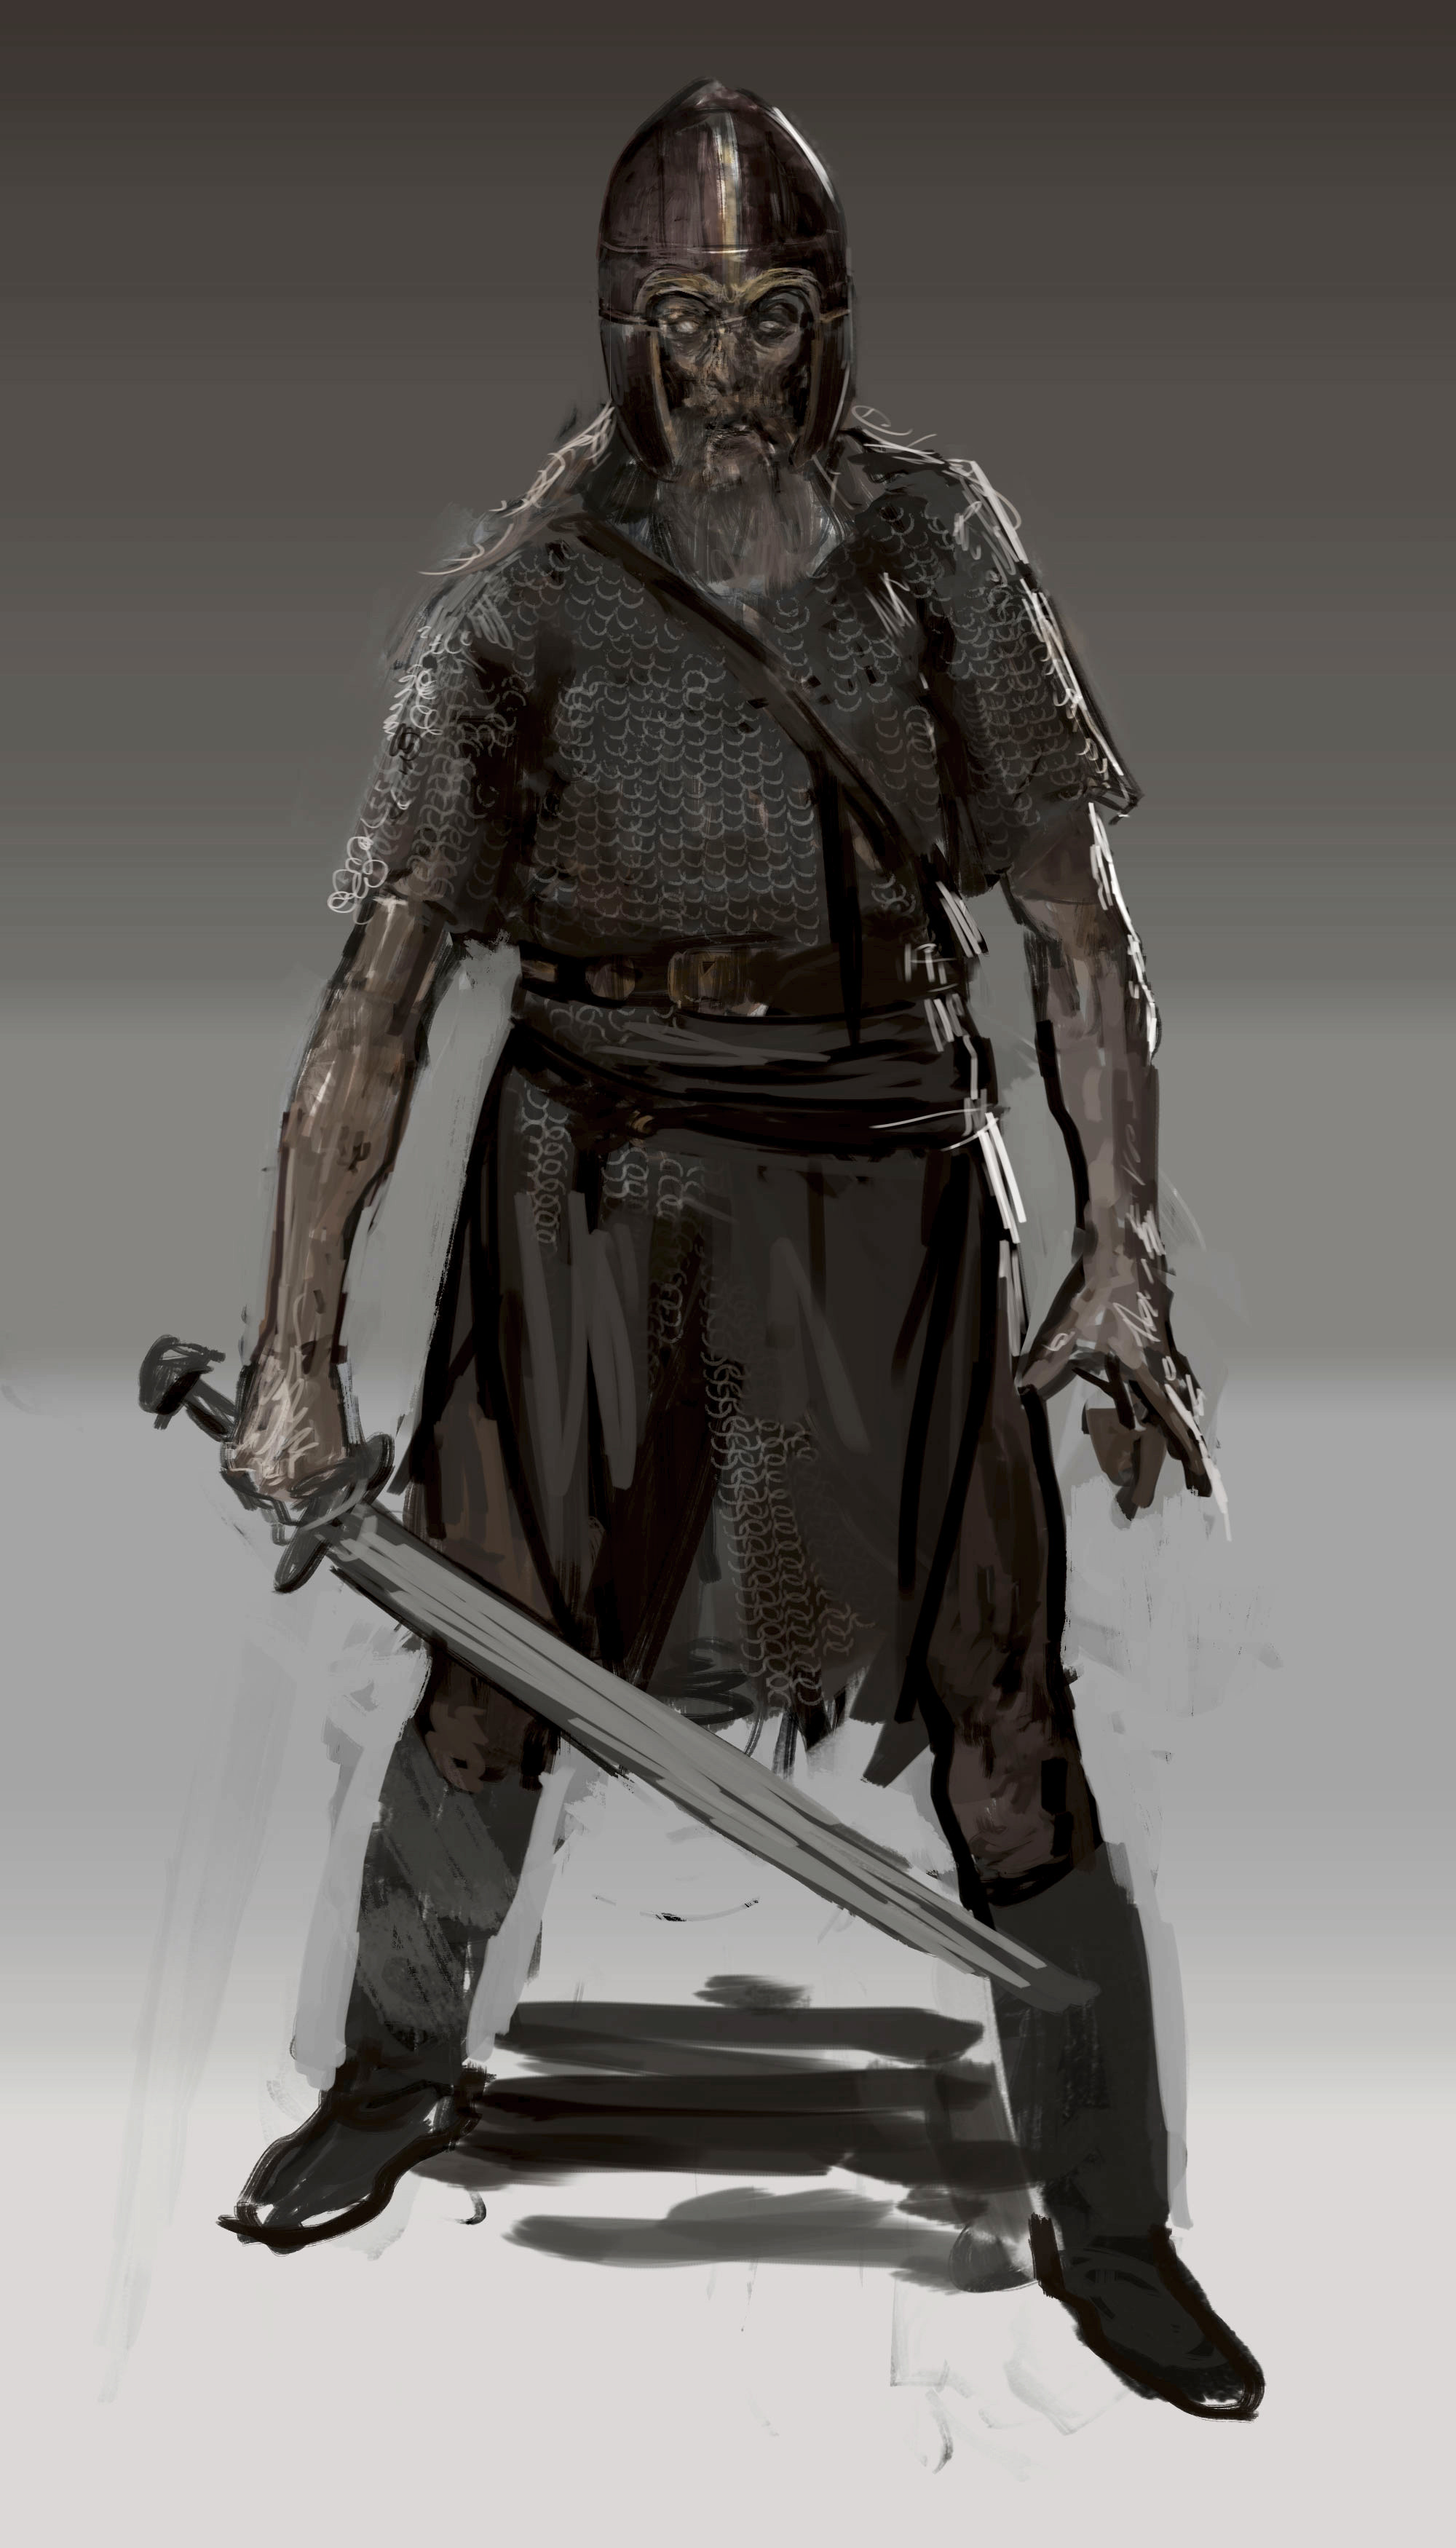 Unfinished render of an undead viking. Concept was supposed to be one of many redesigns of Skyrim's Draugr enemy type, but the idea was abandoned. Inspired by the movie The Northman (2022).